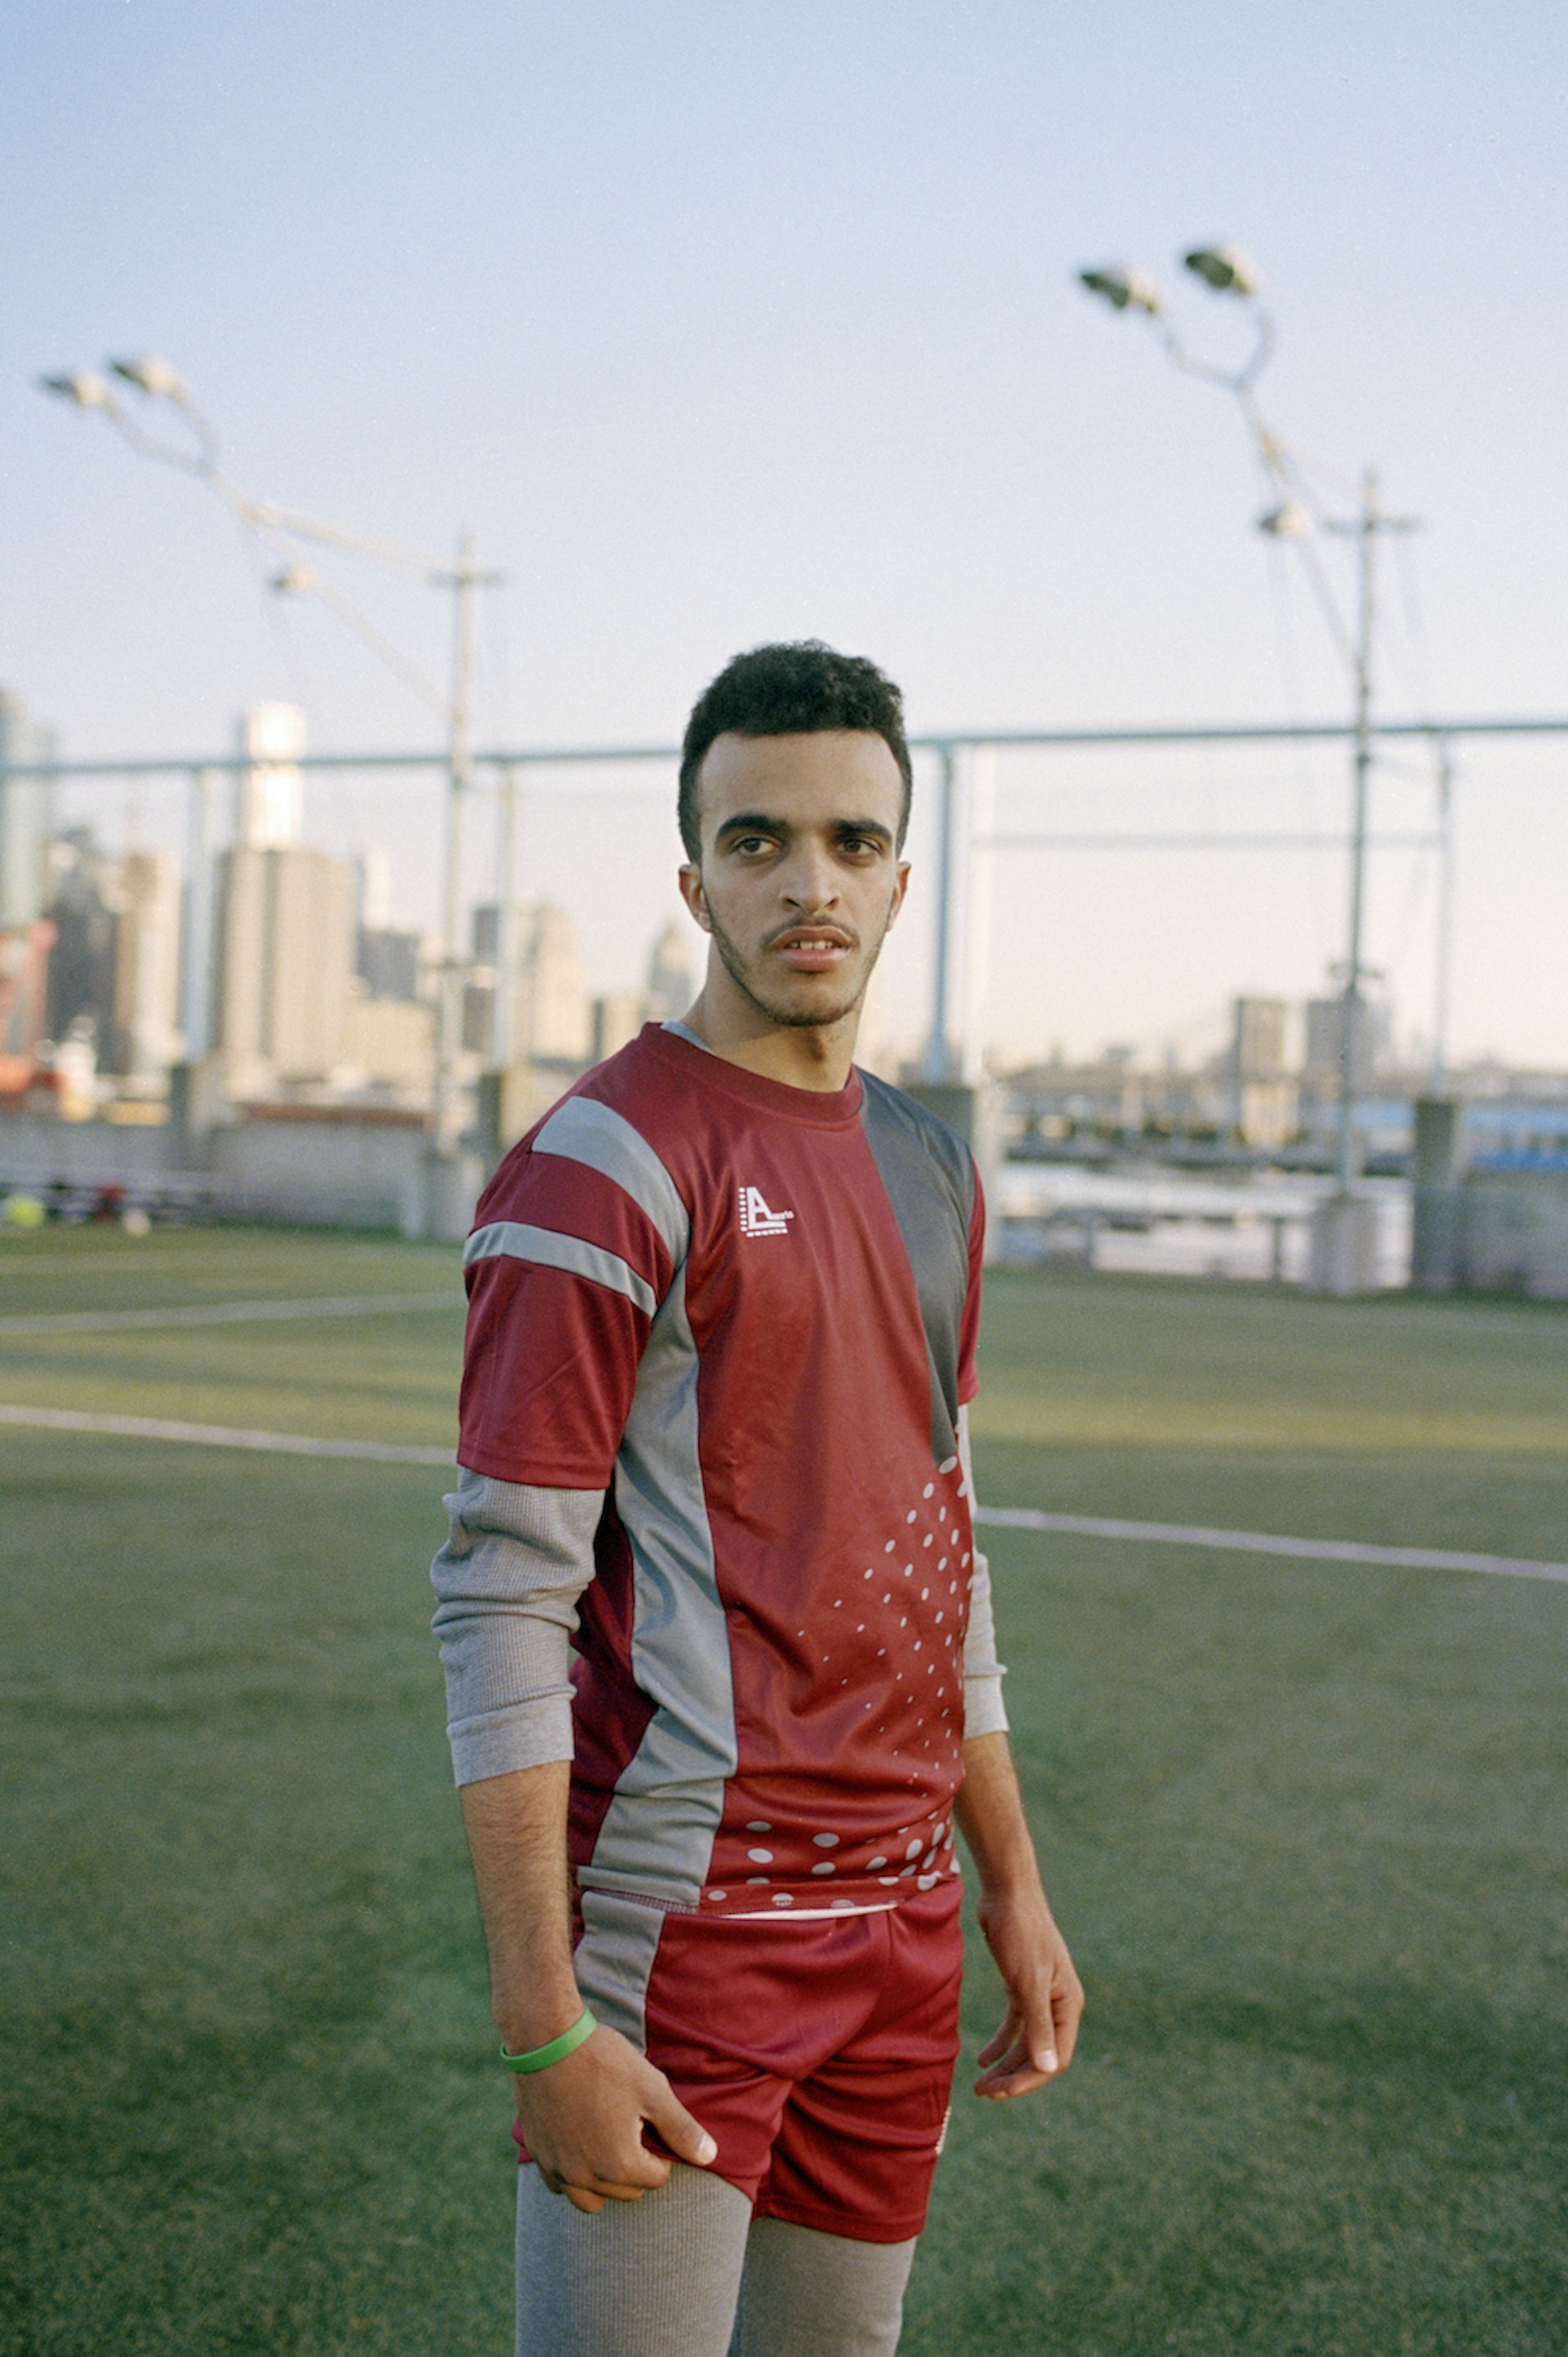 Hamoud Almathil on the field during a training session on an early Saturday morning in Brooklyn, New York.